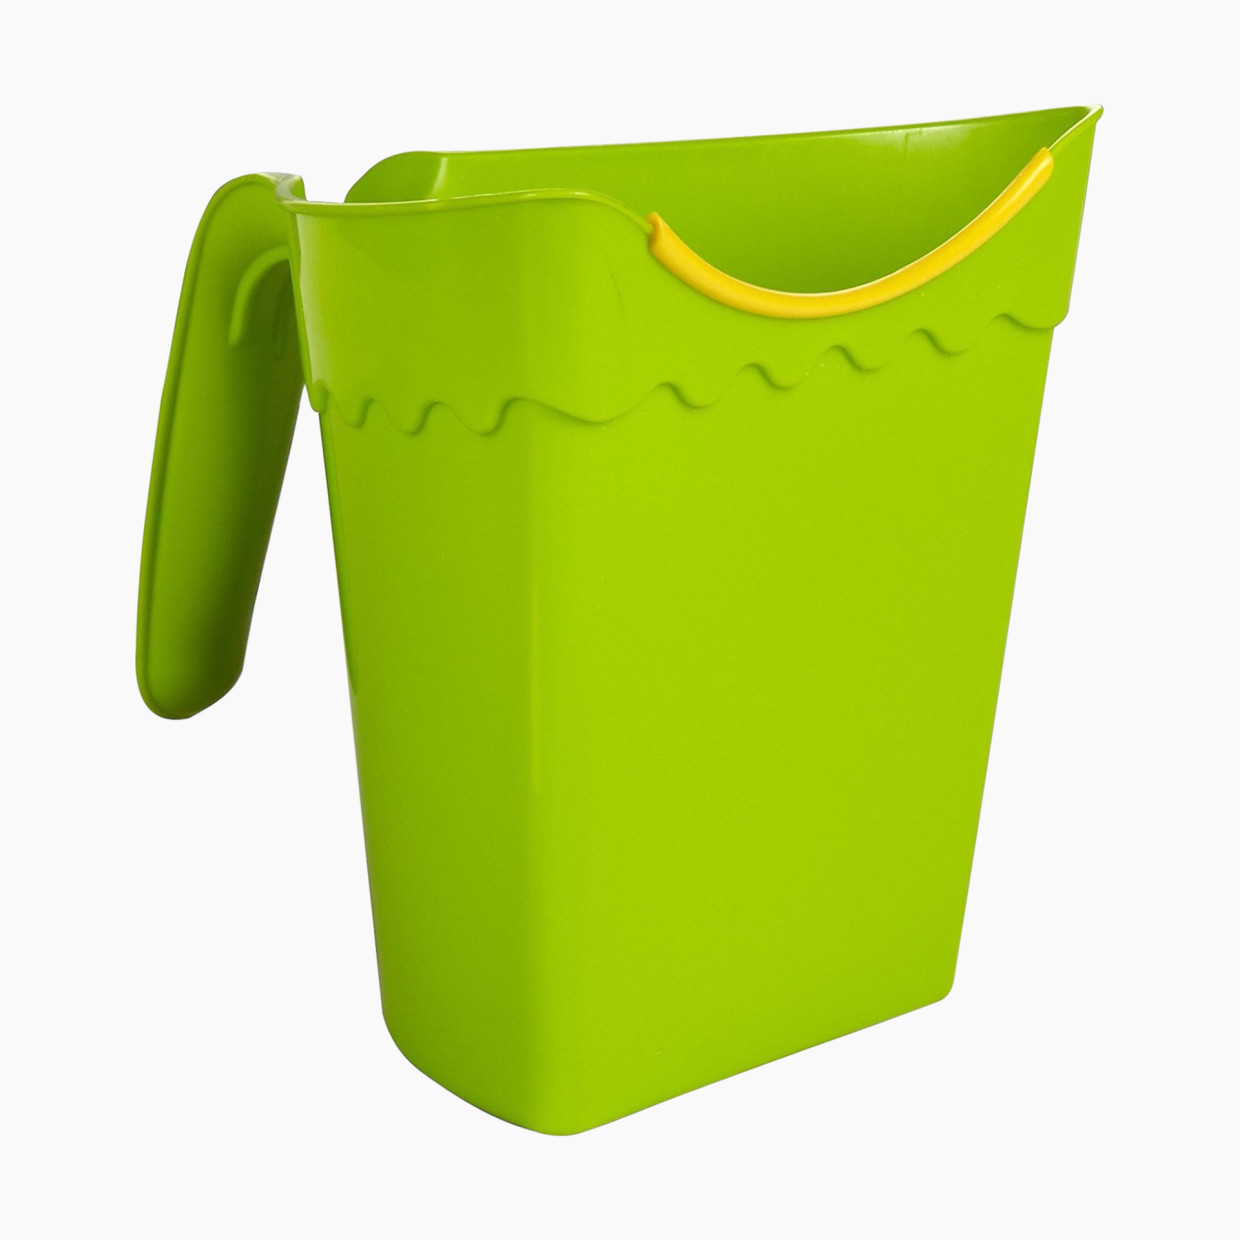 Safety 1st No Tears Rinse Cup - Green.